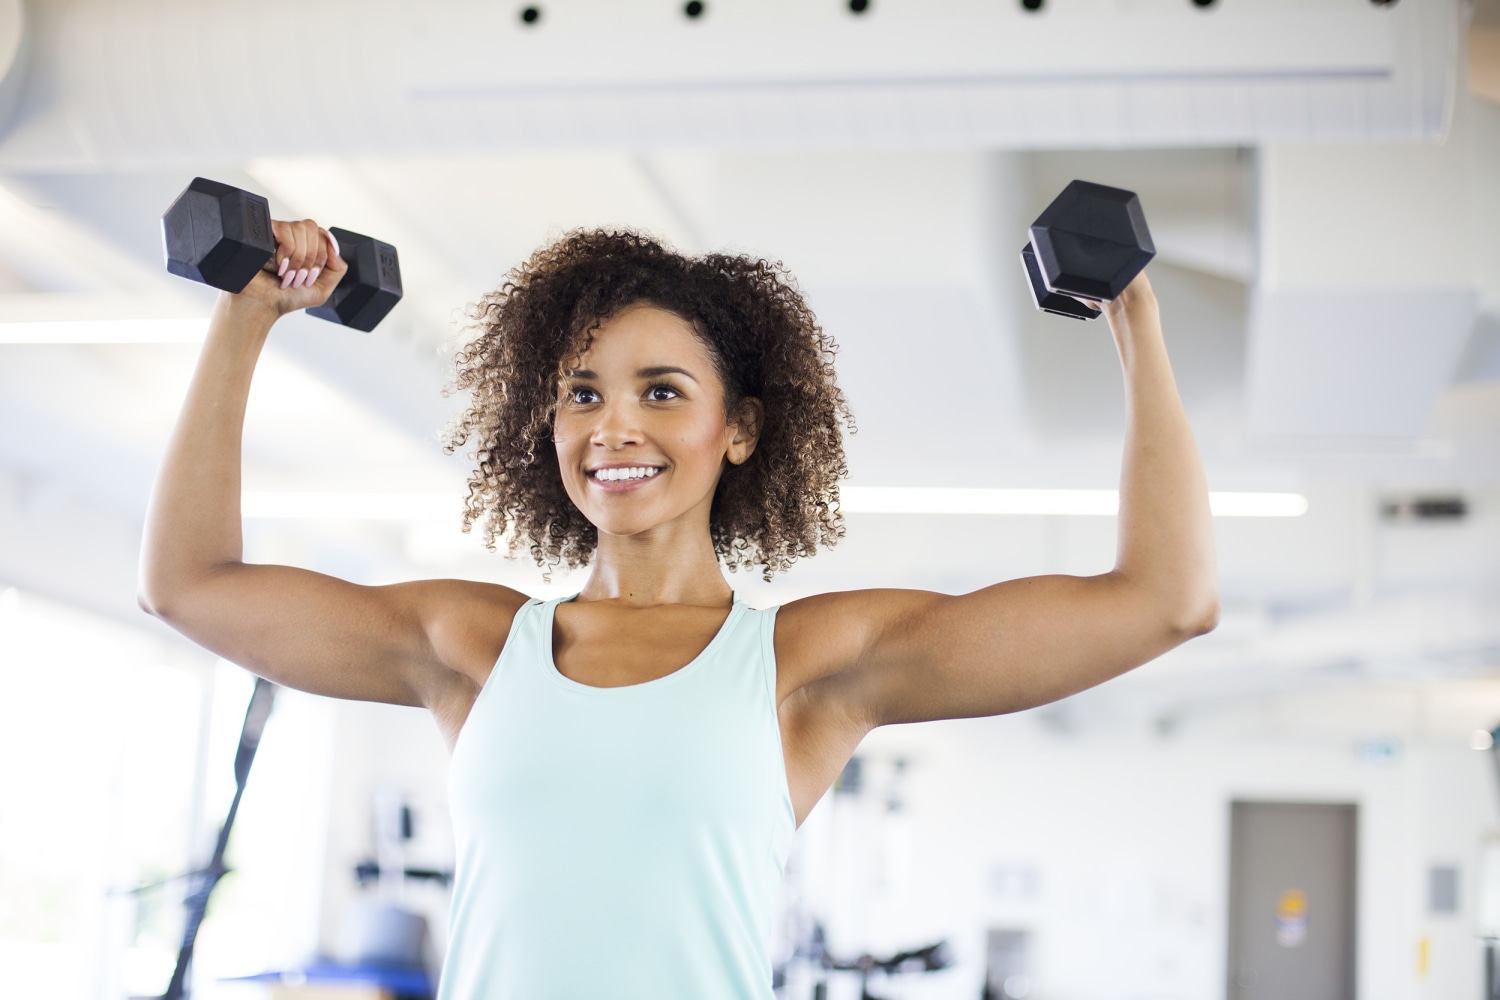 16 Best Arm Exercises Without Weights To Lose Arm Fat Fast